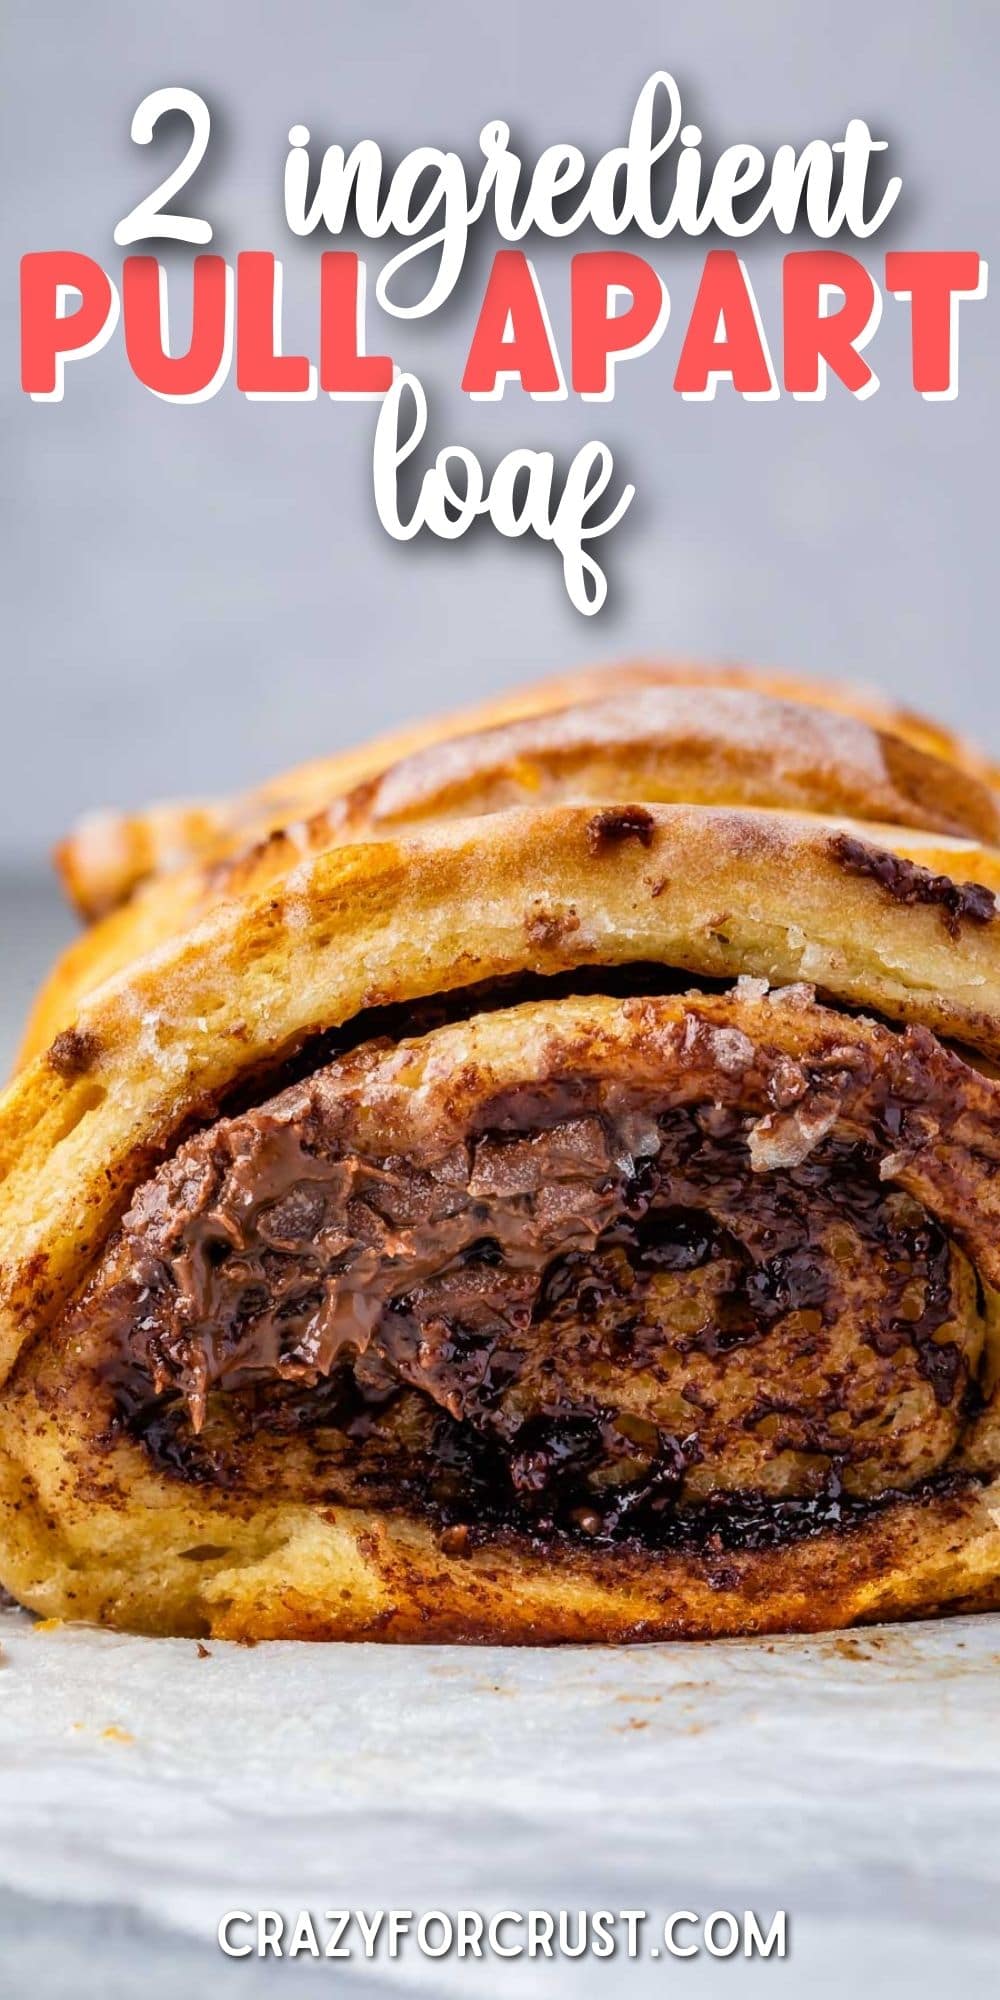 Chocolate cinnamon roll pull apart bread on parchment paper with recipe title on top of image